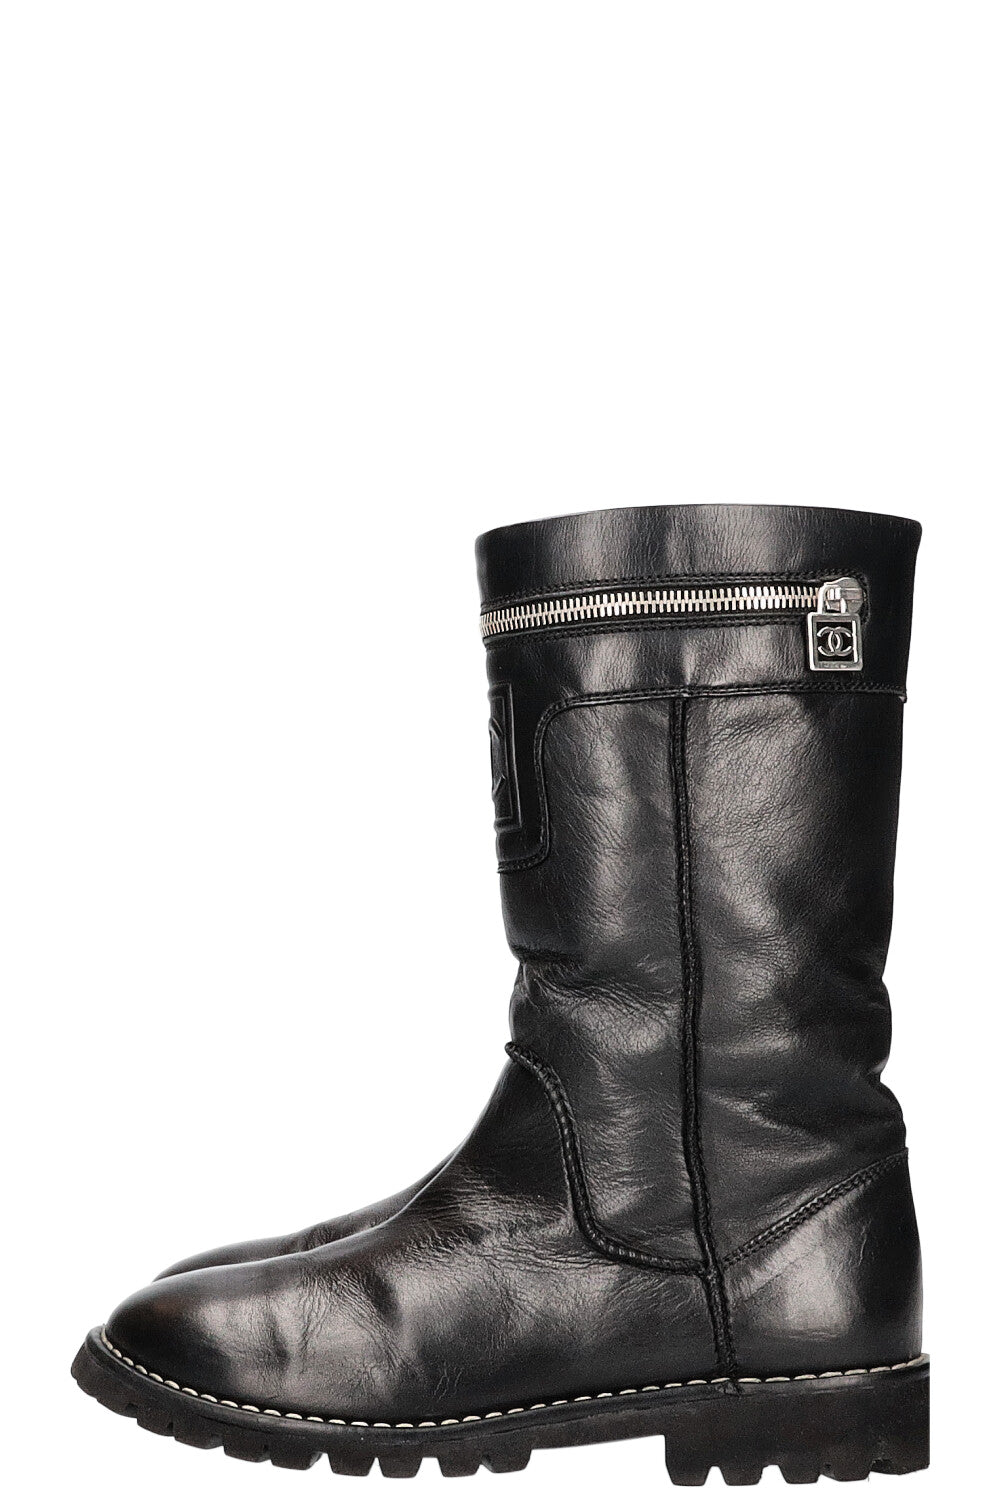 CHANEL Boots Black